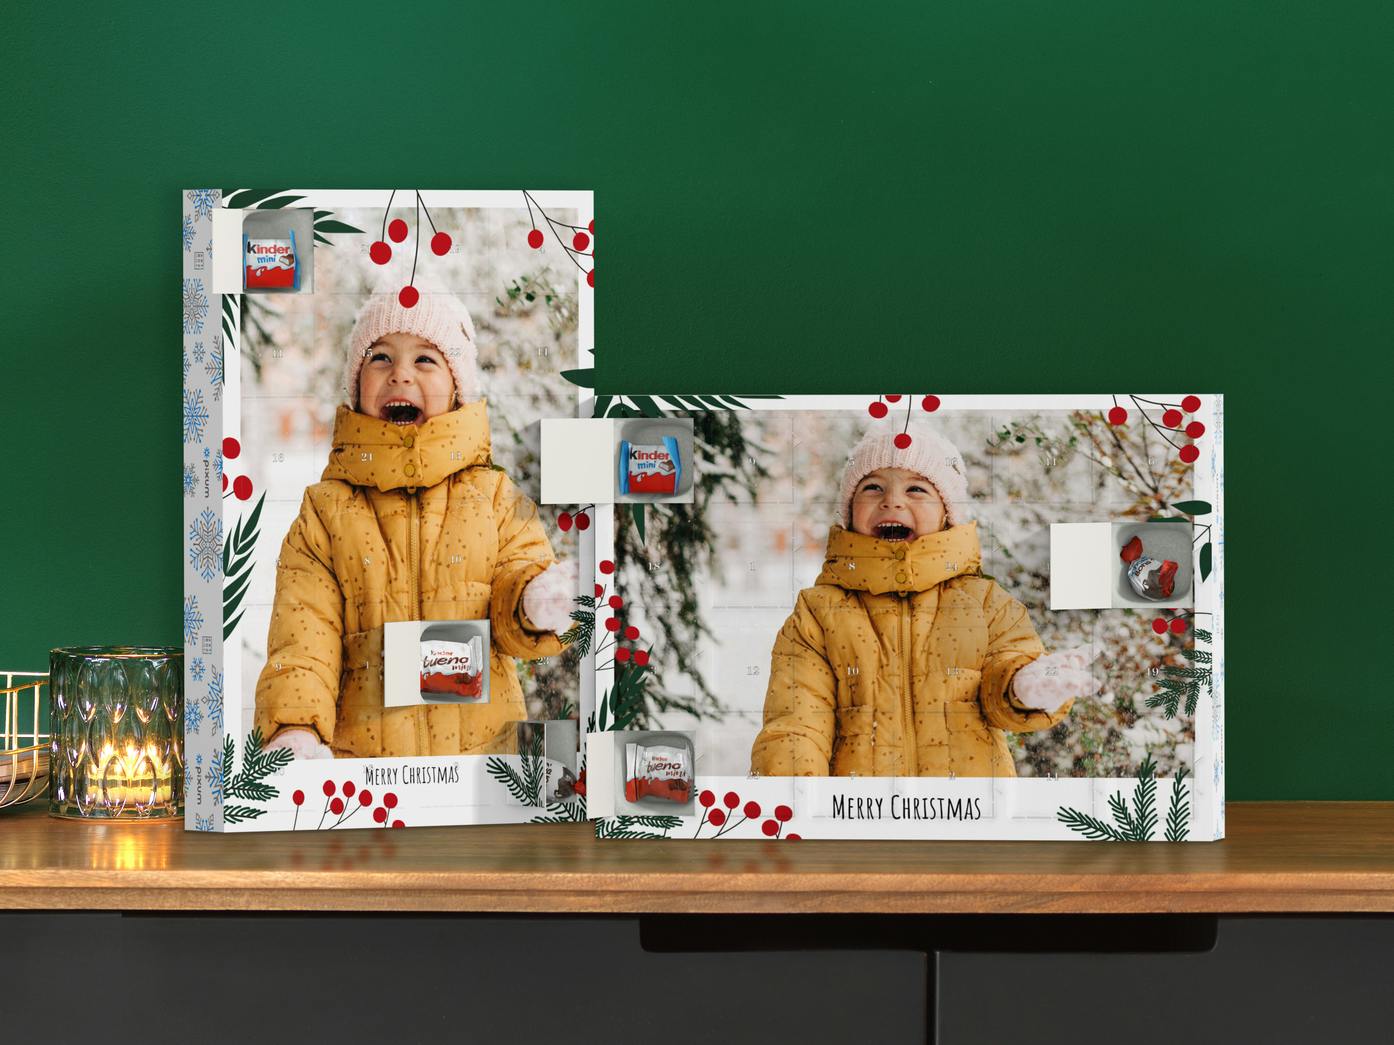 Pixum Advent Calendar with chocolate from kinder in landscape and portrait format